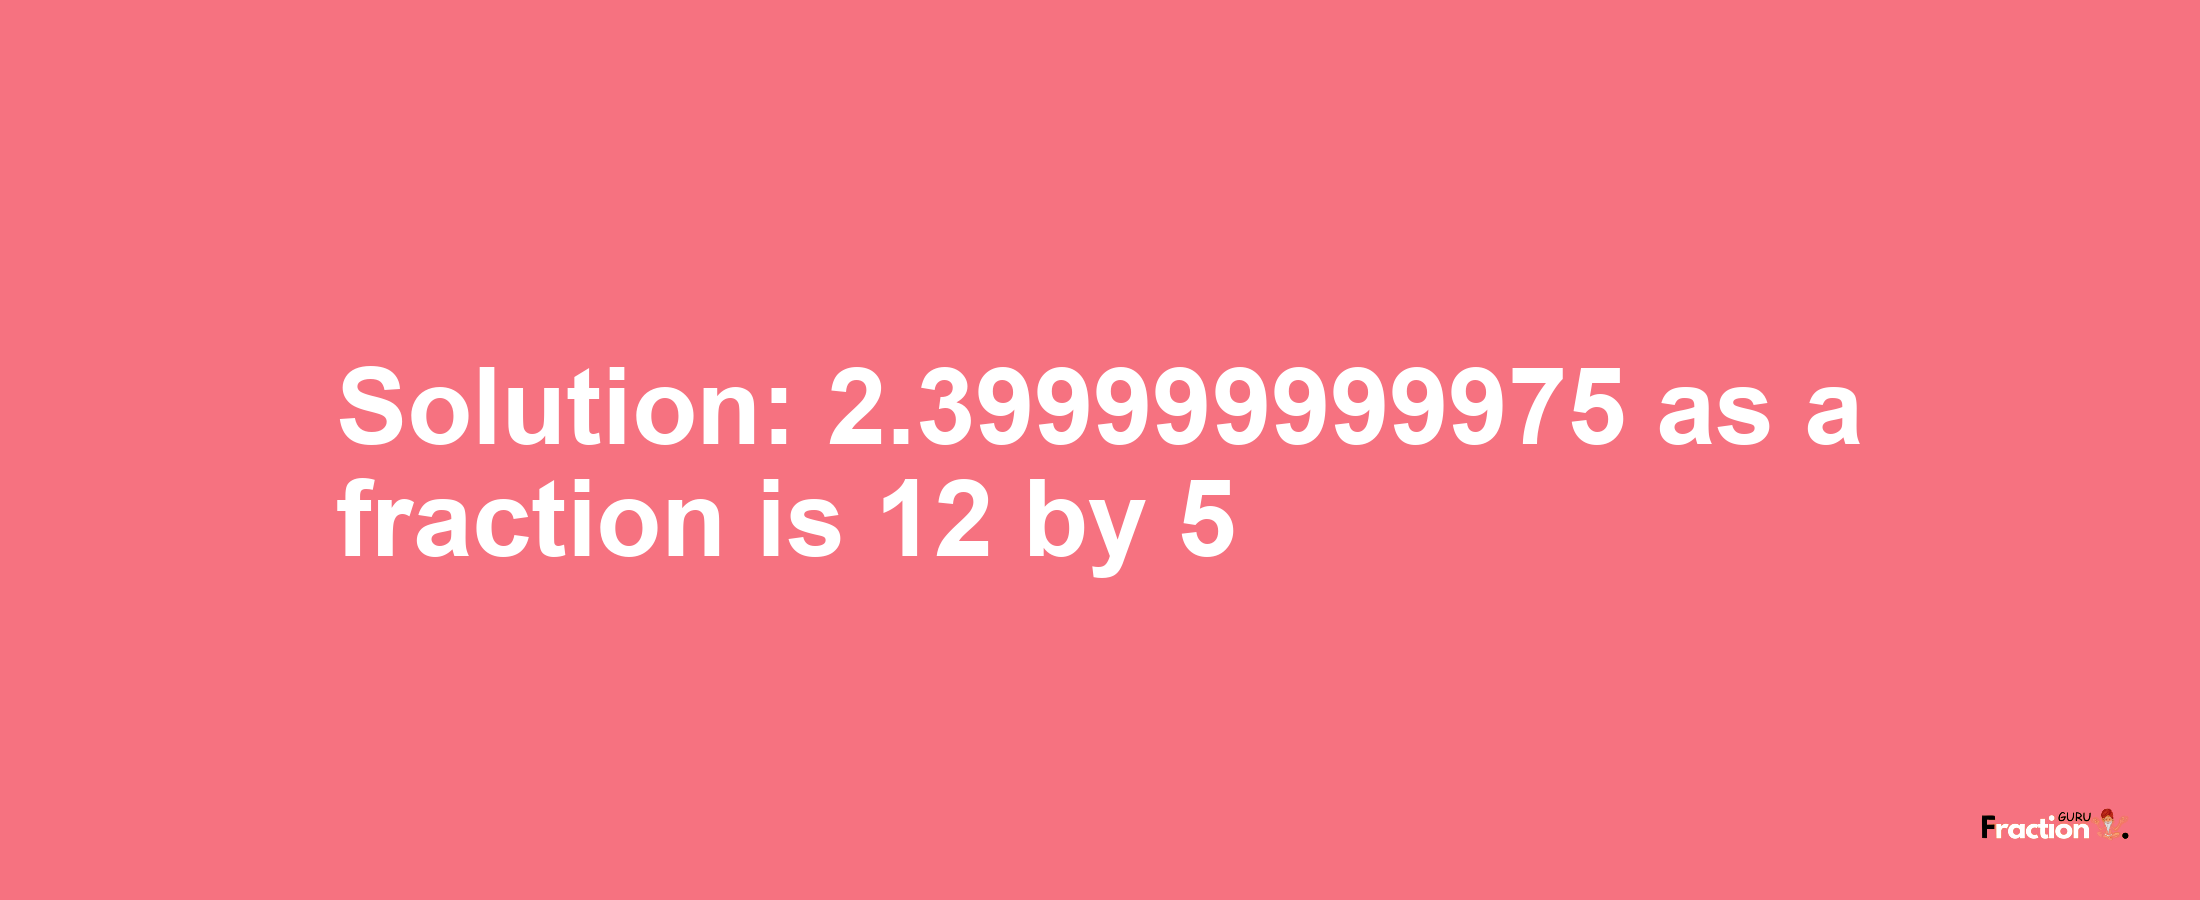 Solution:2.399999999975 as a fraction is 12/5